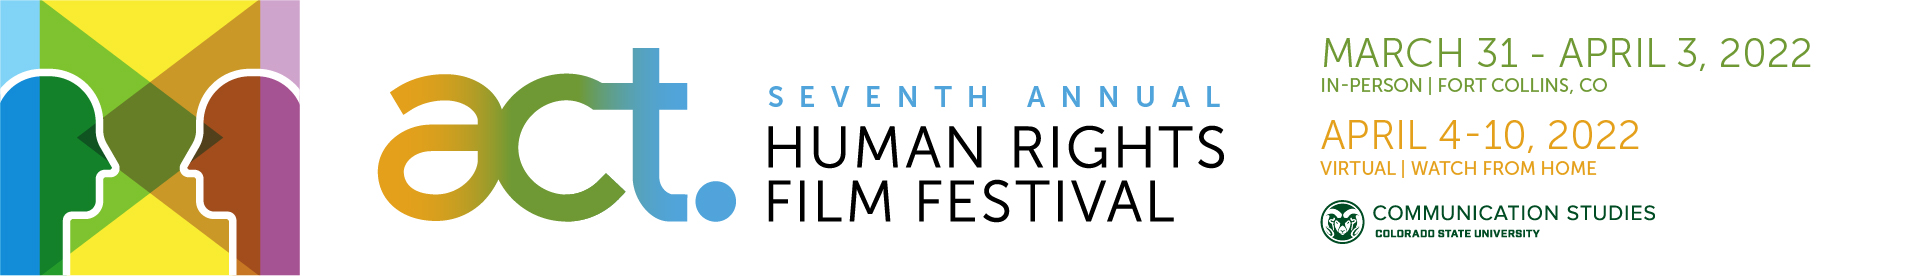 7th ACT Human Rights Film Festival